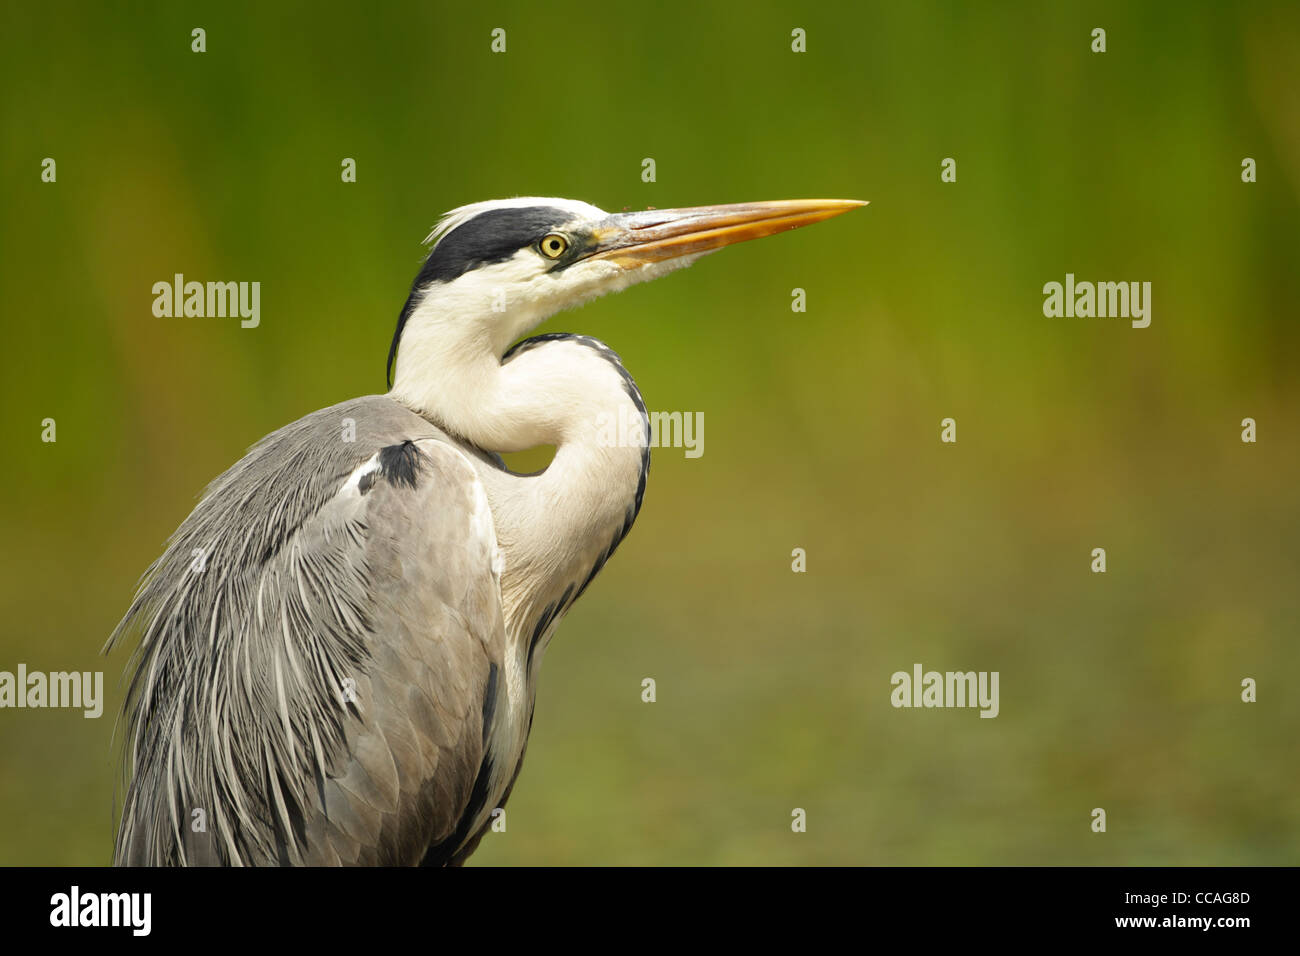 Adult grey heron (Ardea cinerea) showing head, neck and upper body with mosquitoes on beak Stock Photo